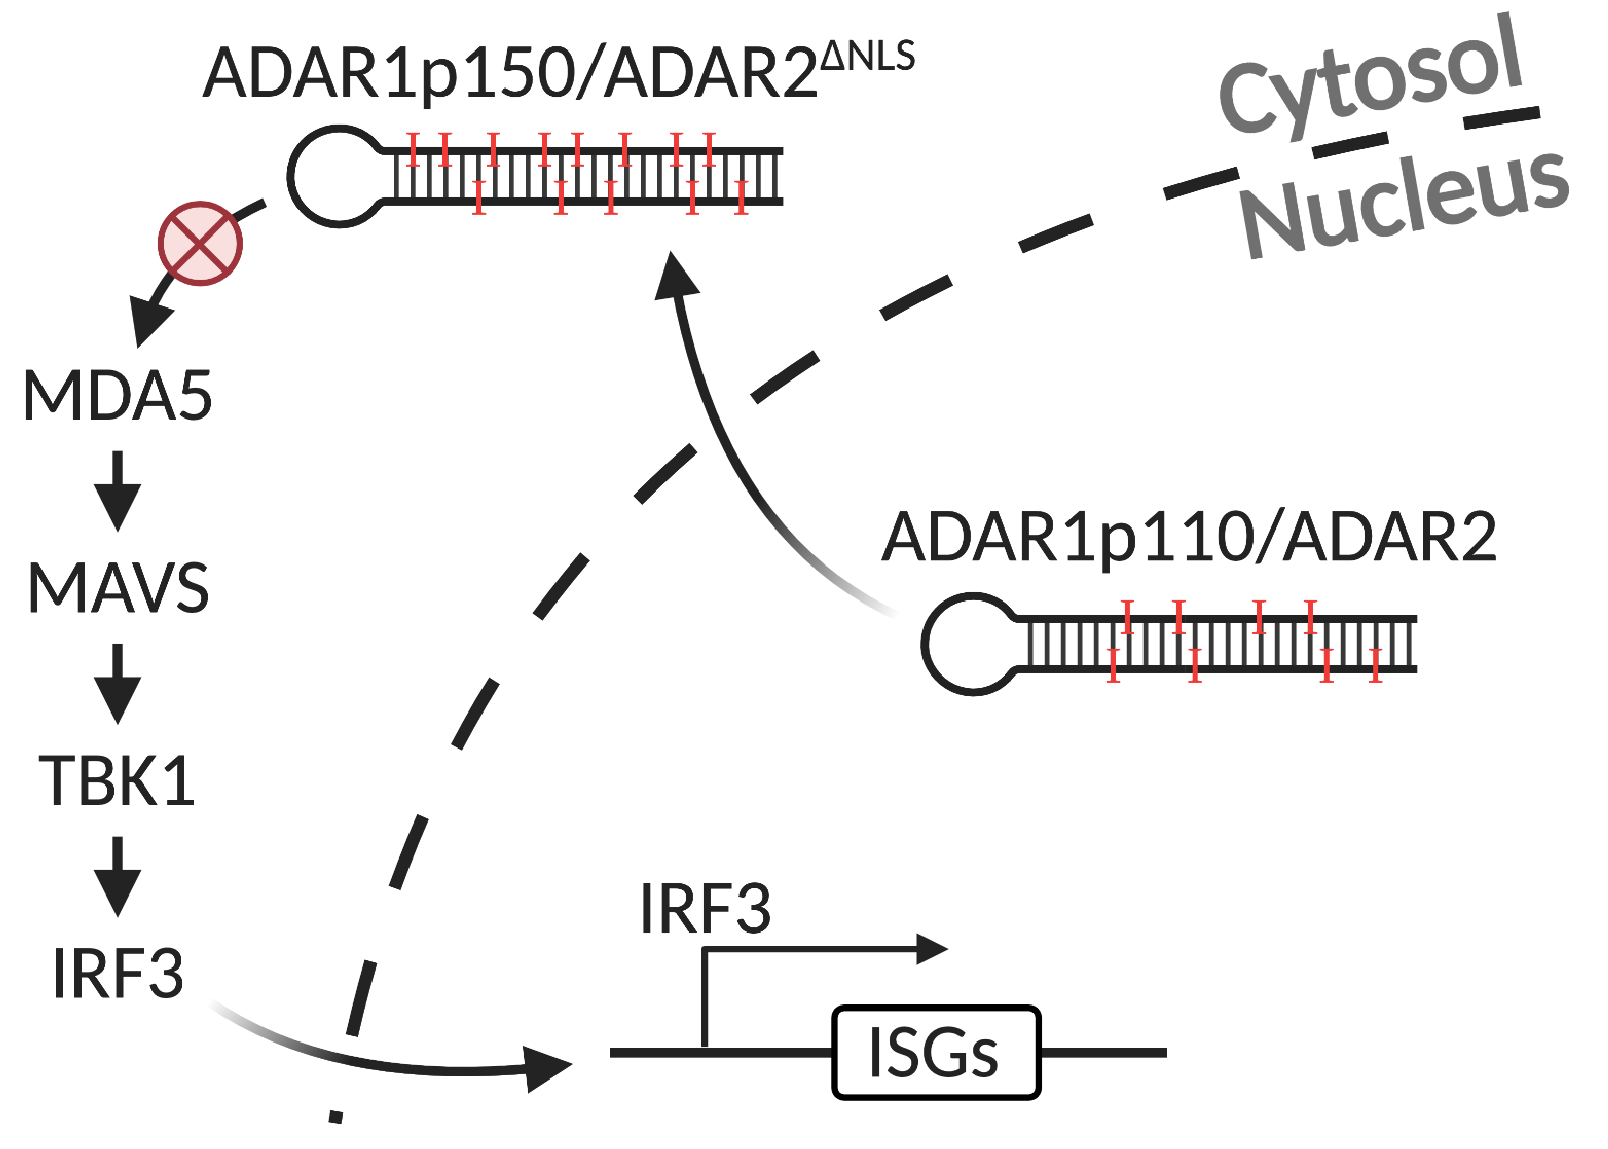 A Small Subset of Cytosolic dsRNAs Must Be Edited by ADAR1 to Evade MDA5-Mediated Autoimmunity